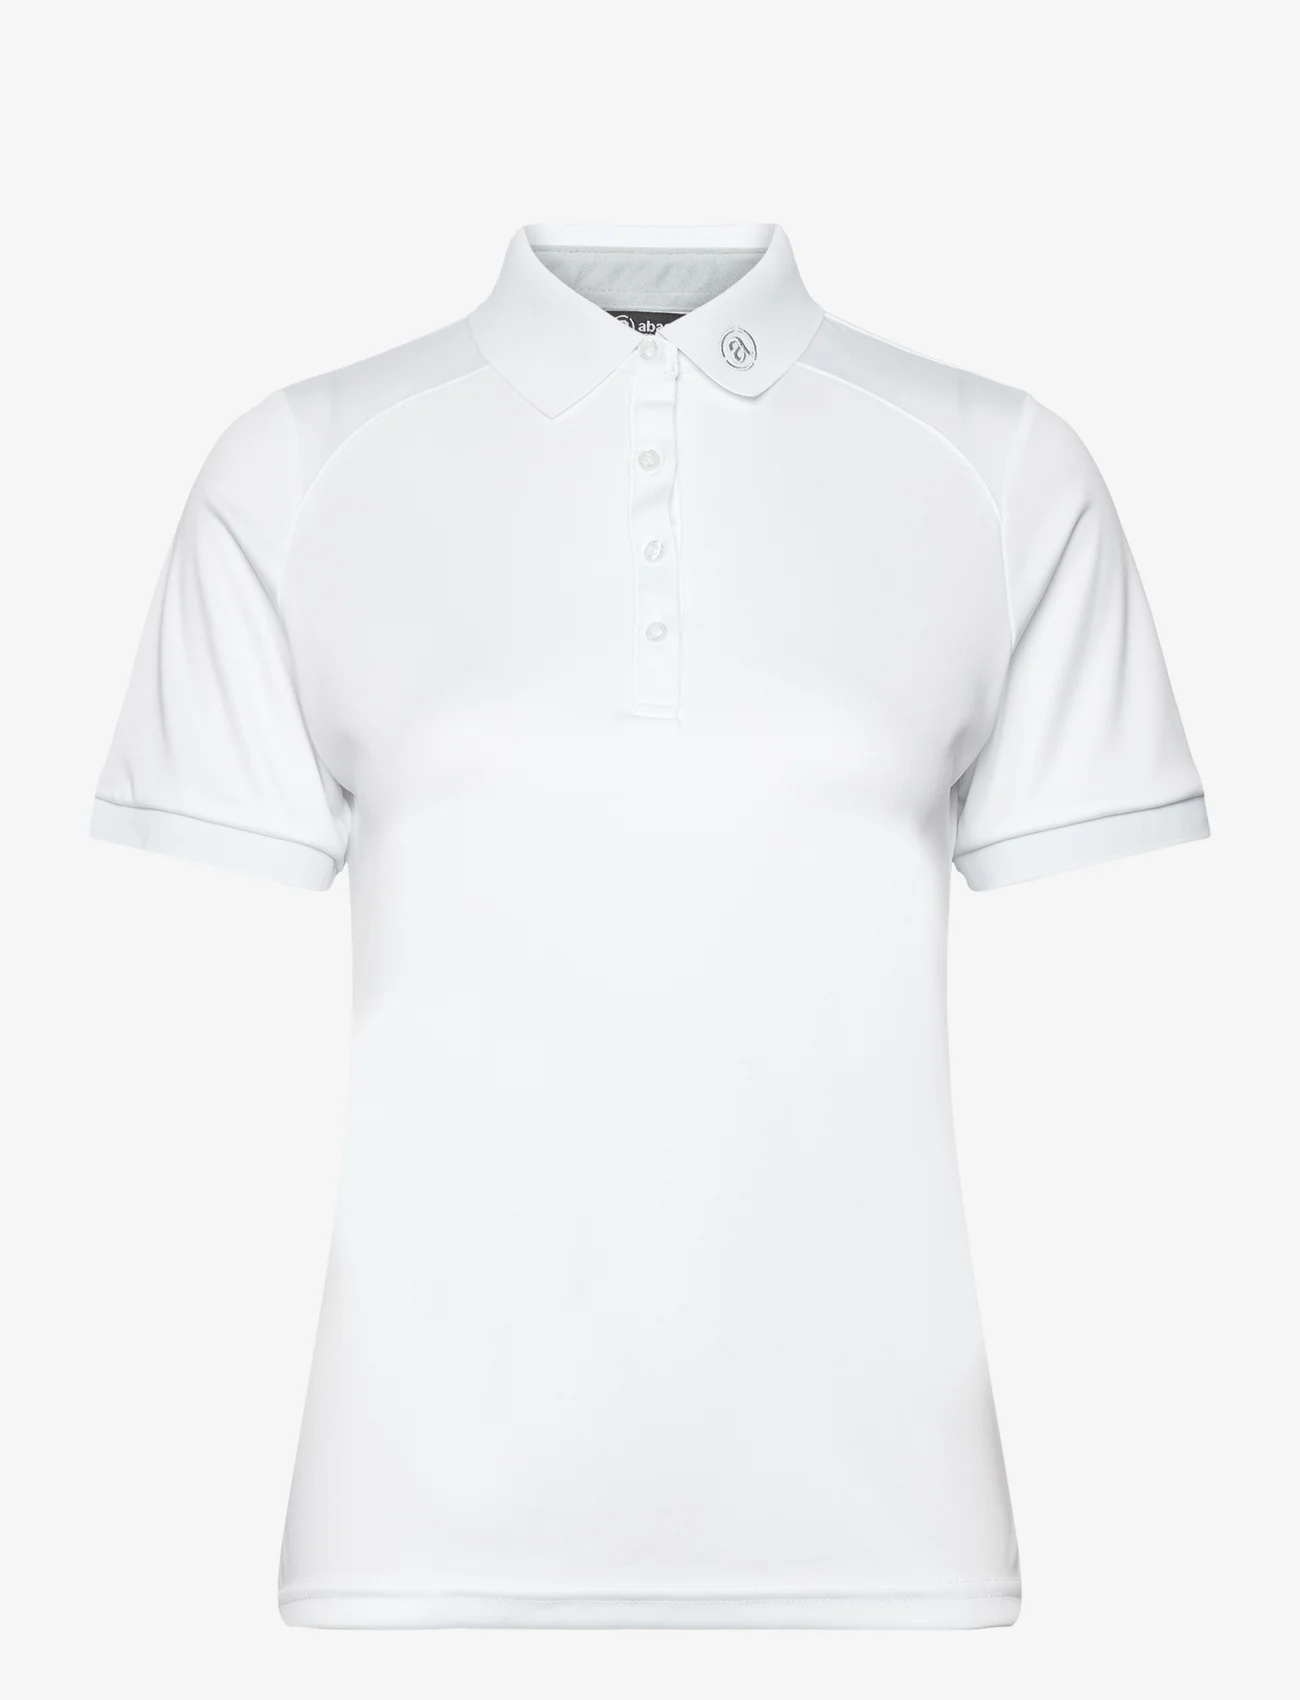 Abacus - Lds Hammel drycool polo - pikéer - white - 0